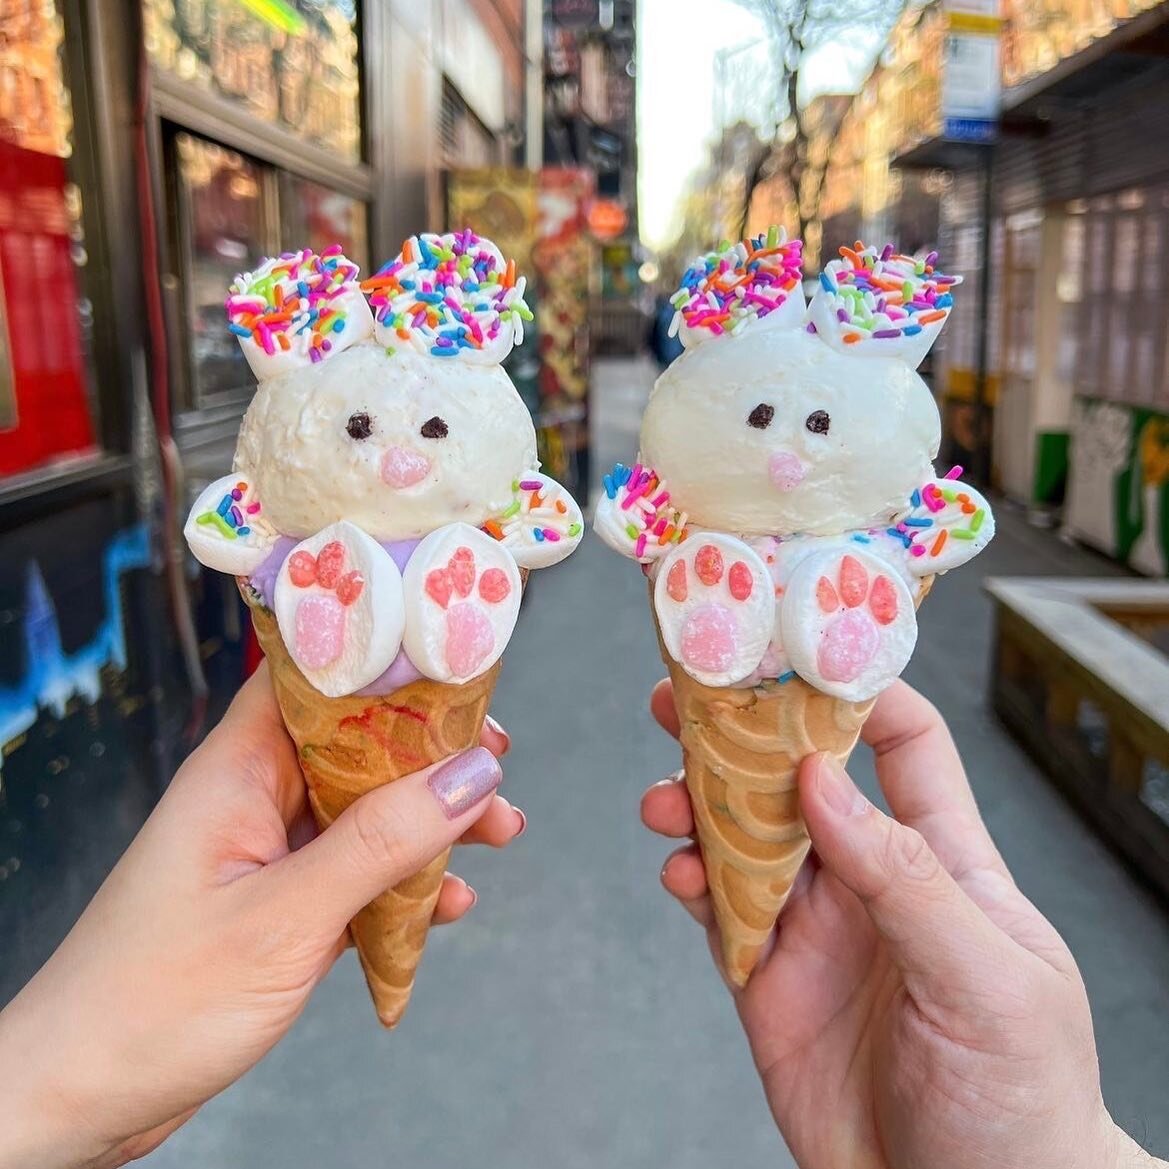 If we don&rsquo;t get matching bunnies, I don&rsquo;t want it 🙅&zwj;♀️🐰 
.
.
📸: @feedyourgirlfriend
.

#stuffedicecream #Stuffed #icecream #nyc #nycvibes #dessert #icecreambouquet #stuffedbouquet #bouquet #heresmyfood #yougottaeatthis #buzzfeedfoo